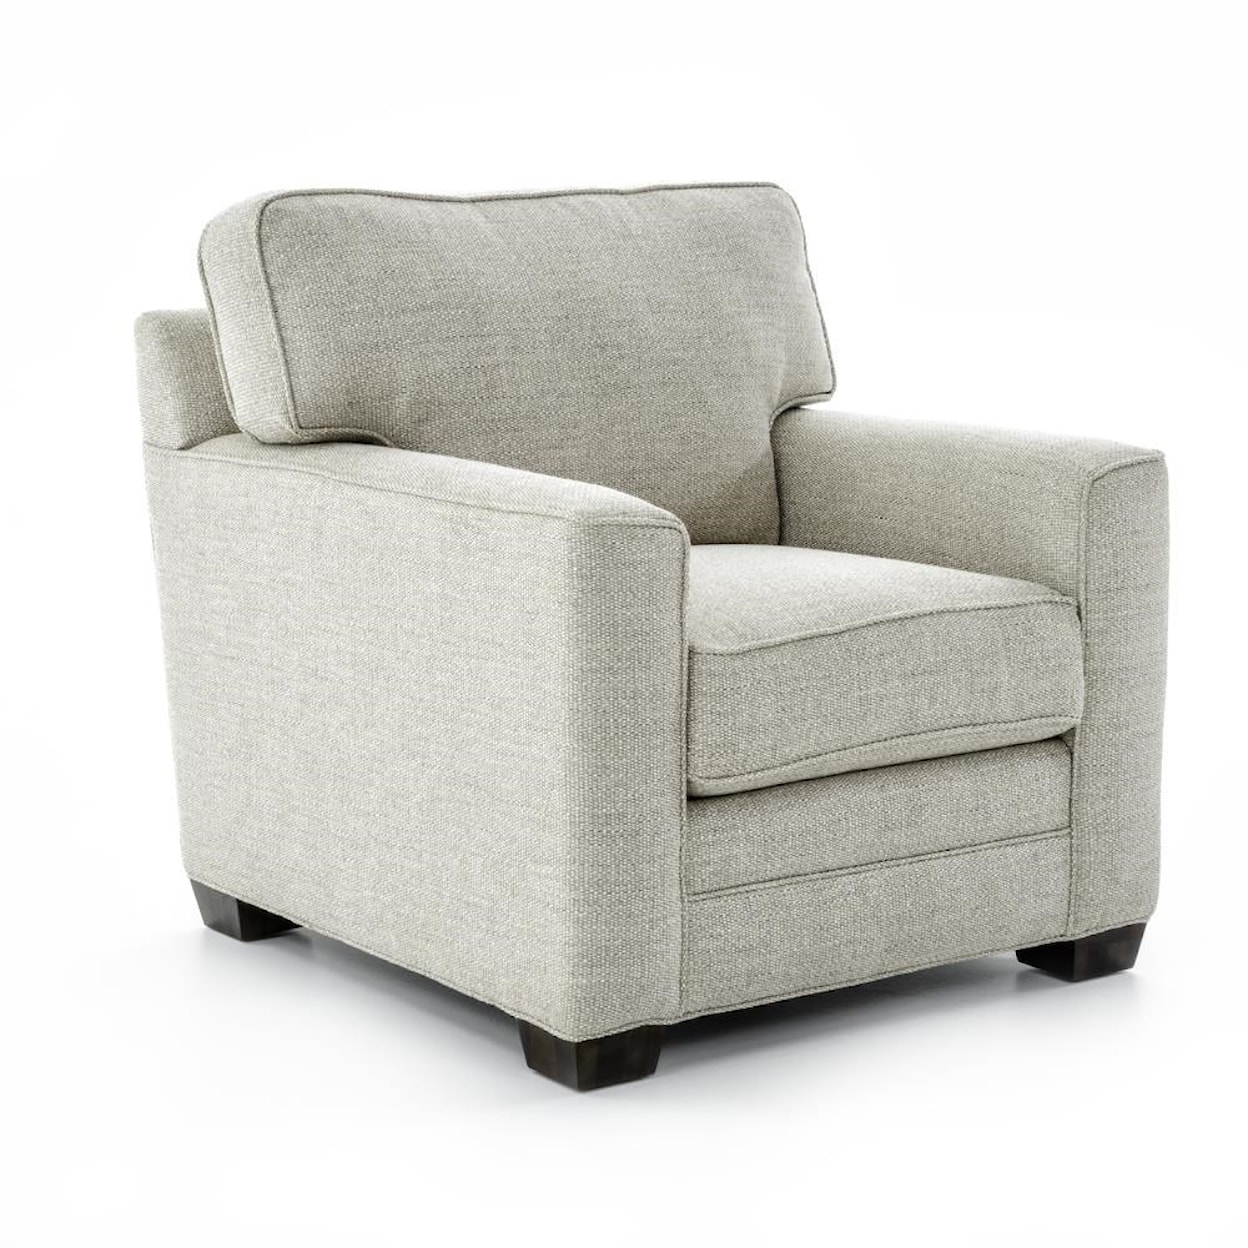 Huntington House Solutions 2053 Customizable Upholstered Chair